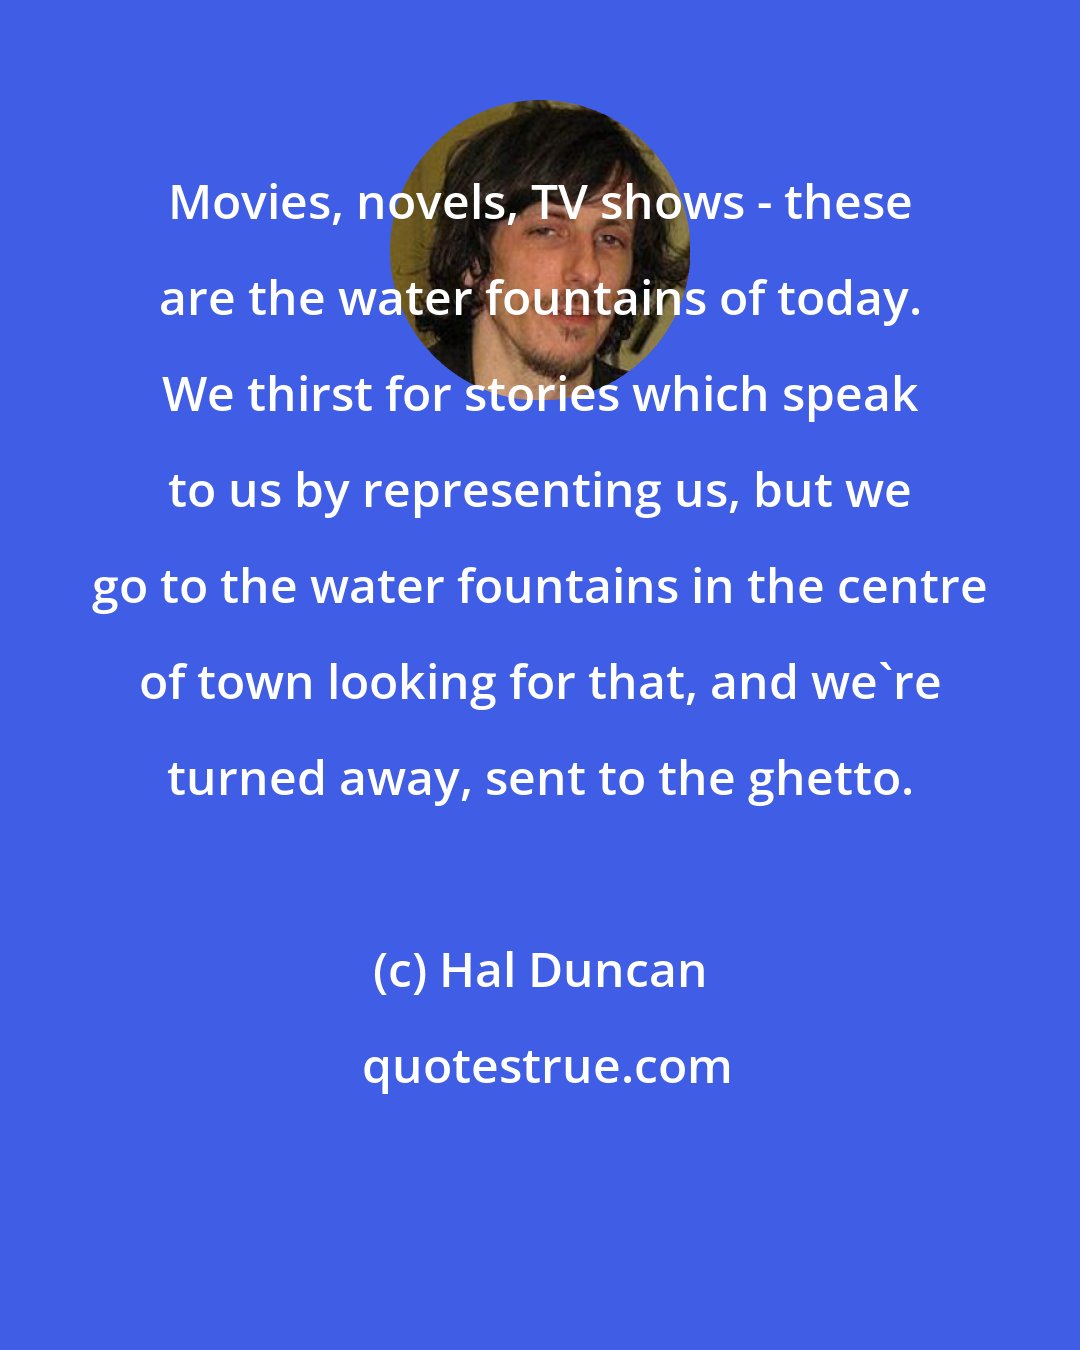 Hal Duncan: Movies, novels, TV shows - these are the water fountains of today. We thirst for stories which speak to us by representing us, but we go to the water fountains in the centre of town looking for that, and we're turned away, sent to the ghetto.